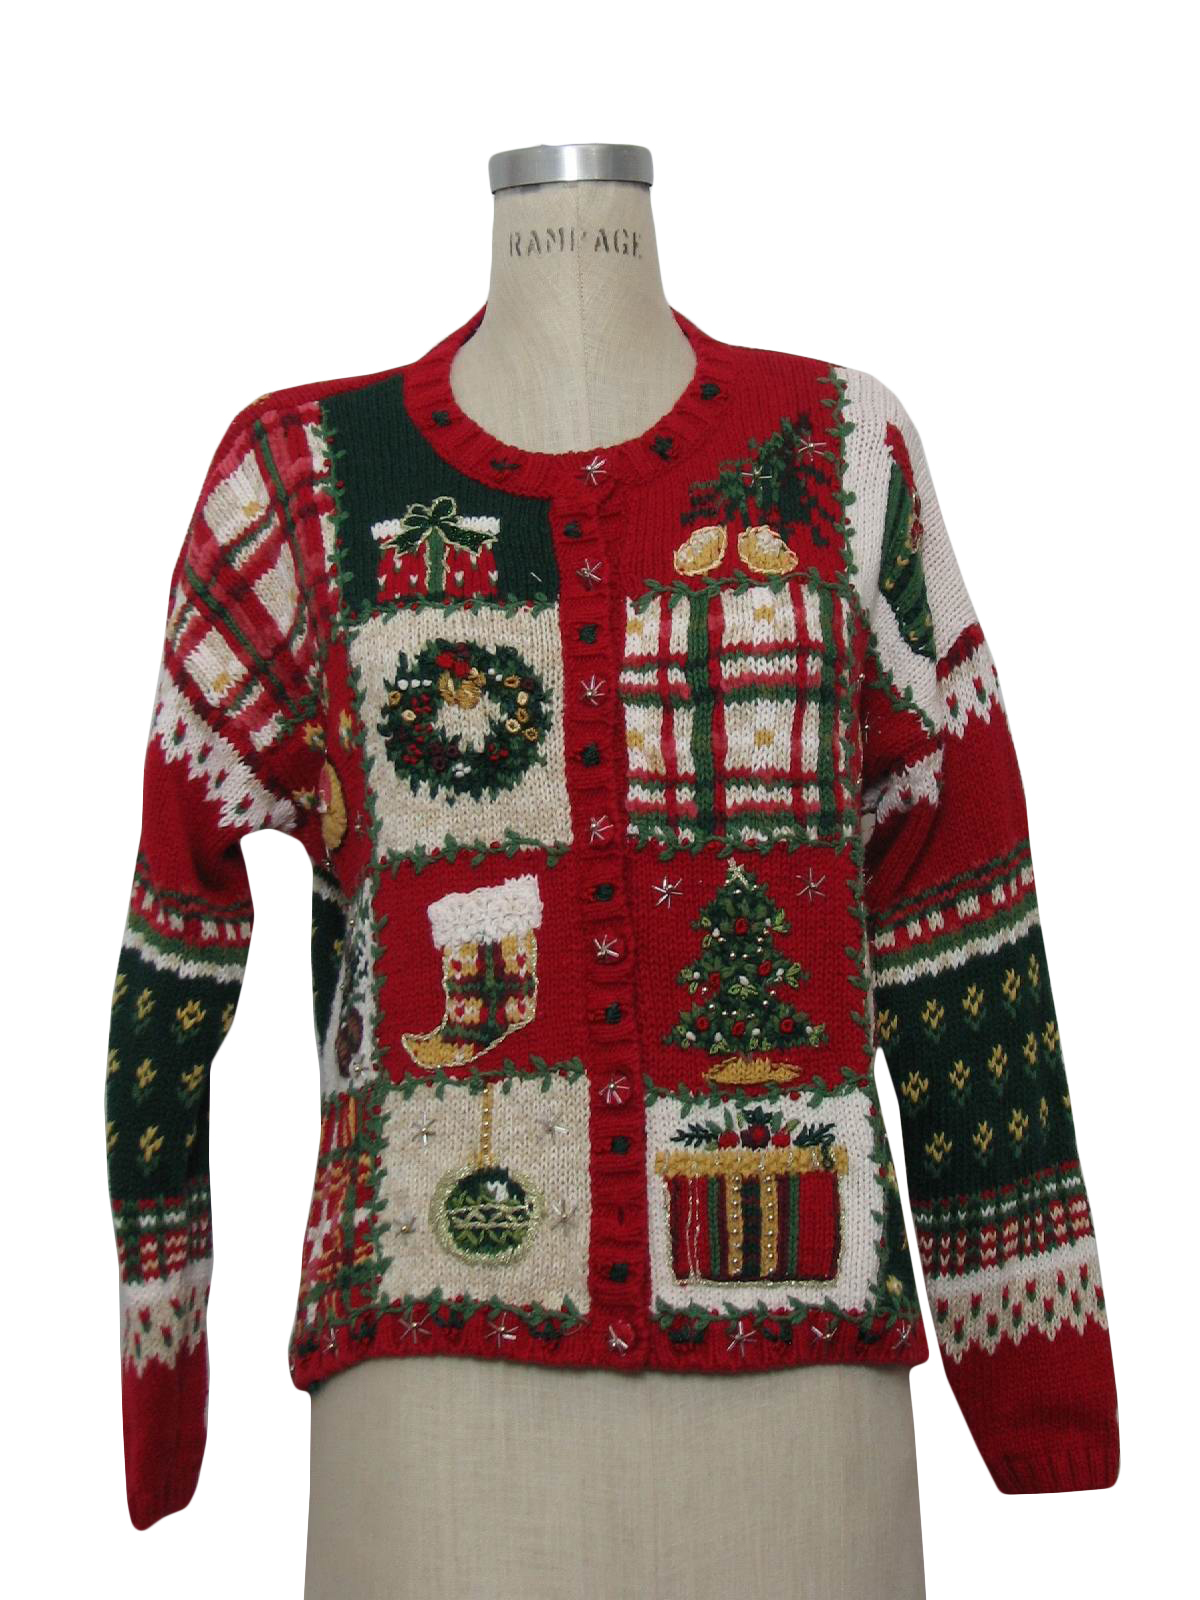 Womens Ugly Christmas Sweater: -Heirloom Collectibles- Womens red ...